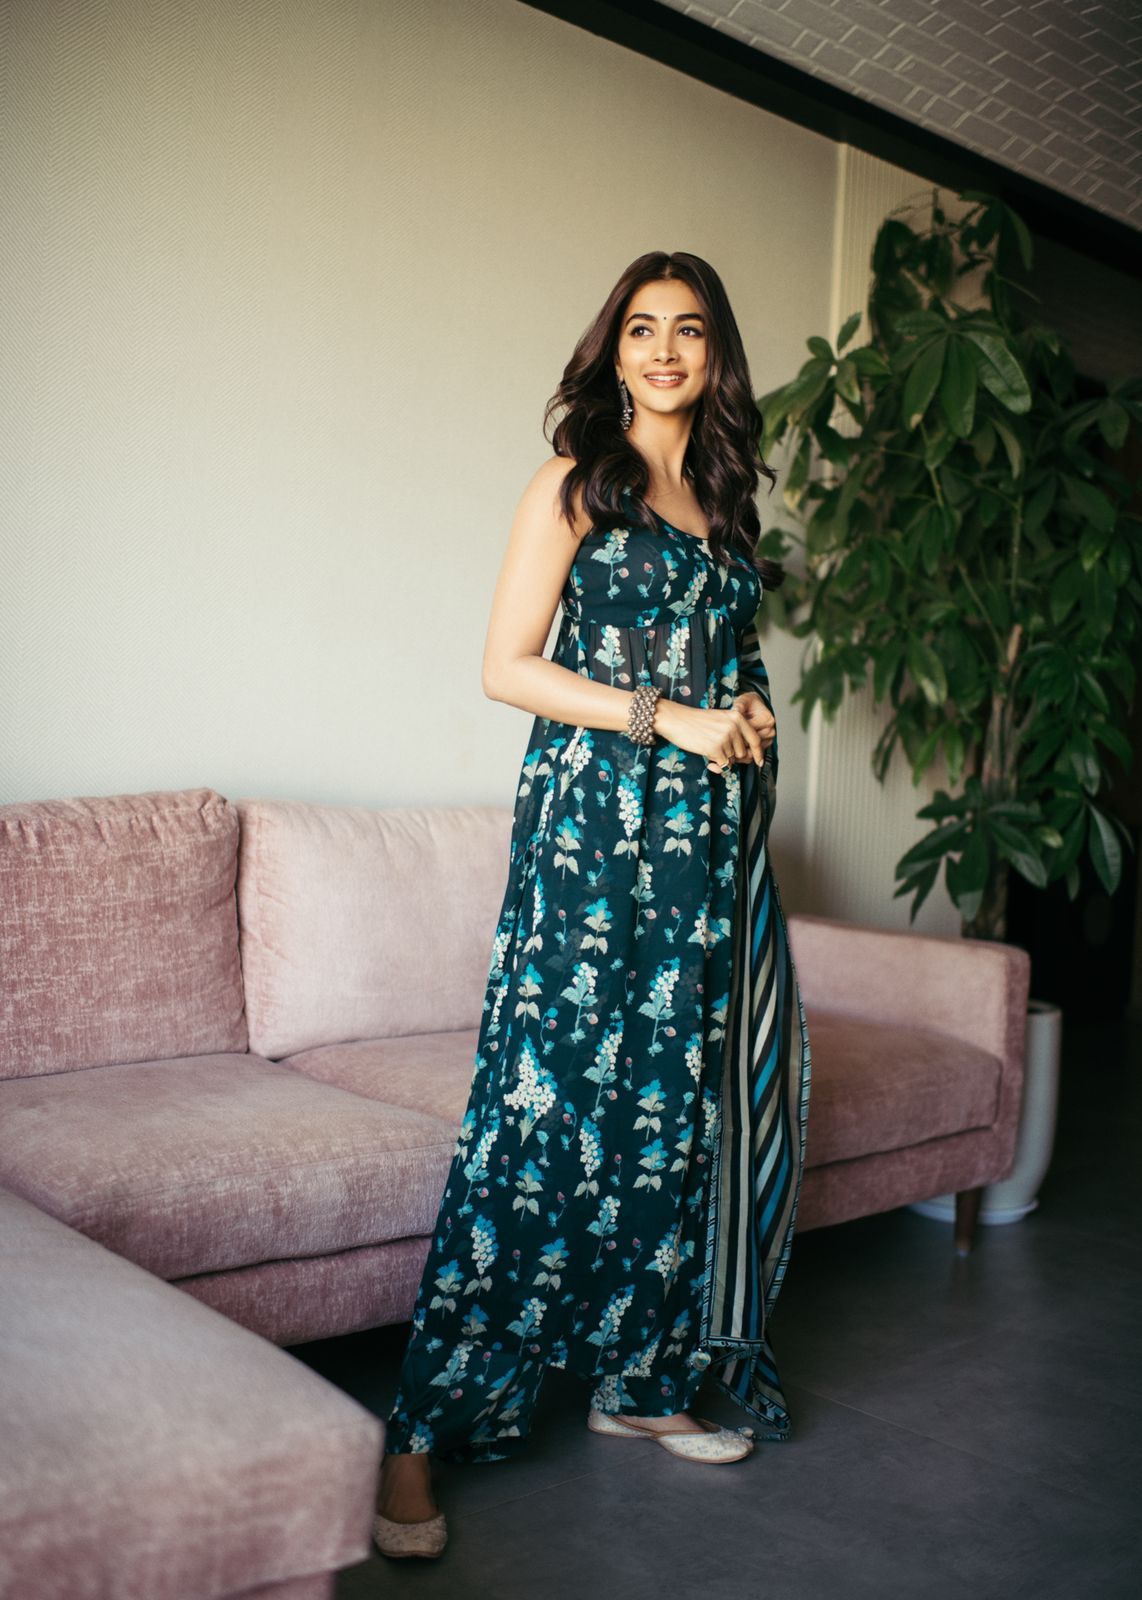 32 years old, Pooja Hegde goes comfy and stylish in a printed suit set ...